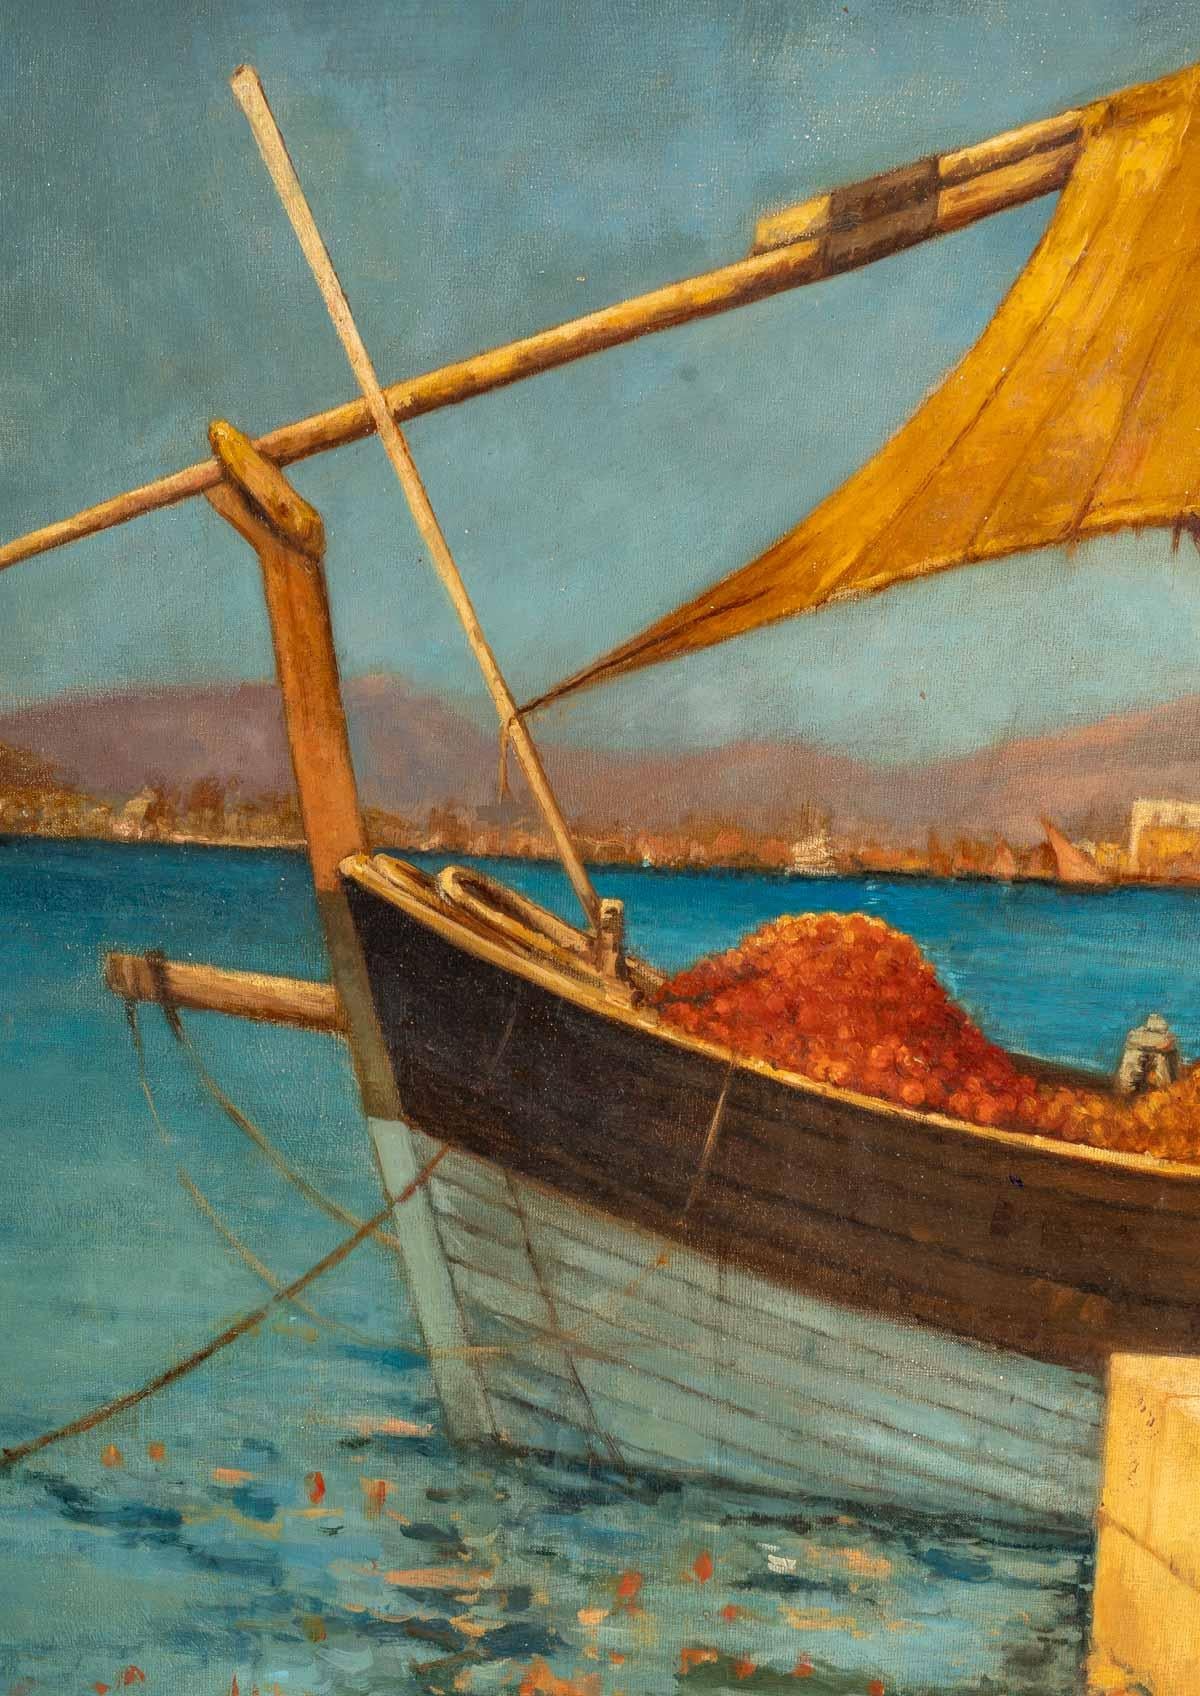 Important oil on canvas, 19th or early 20th century, representing orange merchants on the Mediterranean coast.
Frame - H: 154 cm, W: 193 cm, D: 10 cm
Canvas - H: 114 cm, W: 155 cm
ref 3099.